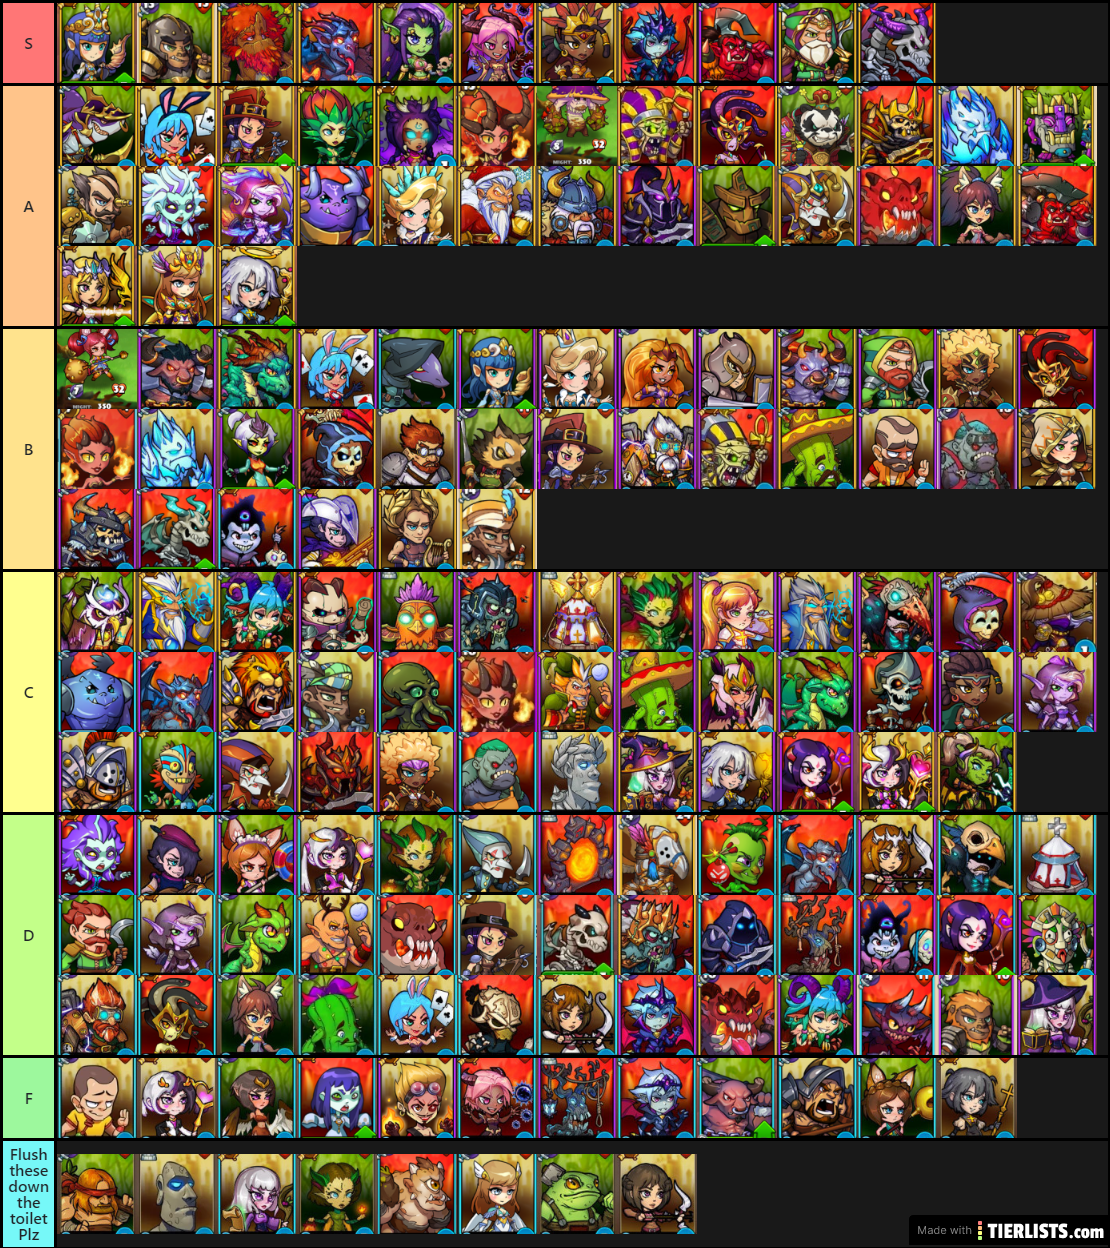 Mighty Party Tier List #1 (All the heroes were supposed to be in alphabetical order but I screwed up) Part 2 coming soon!)